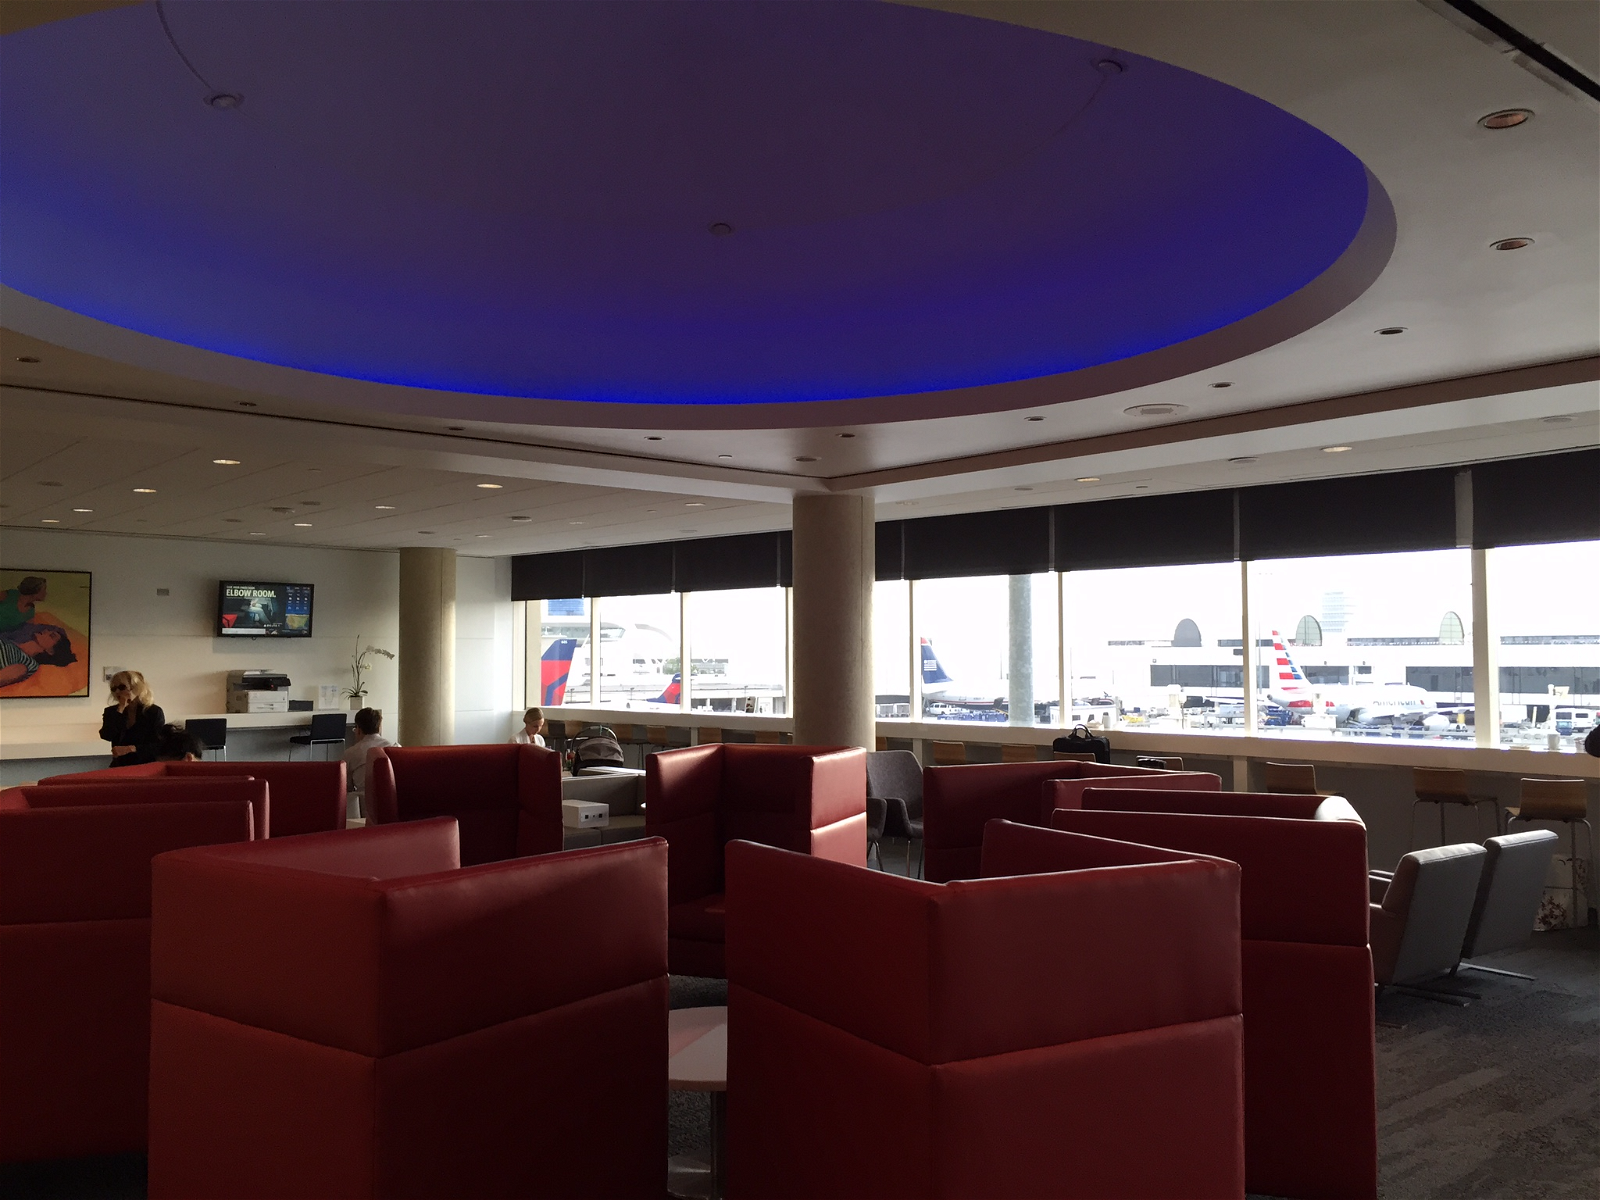 New seating at the Delta Sky Club LAX